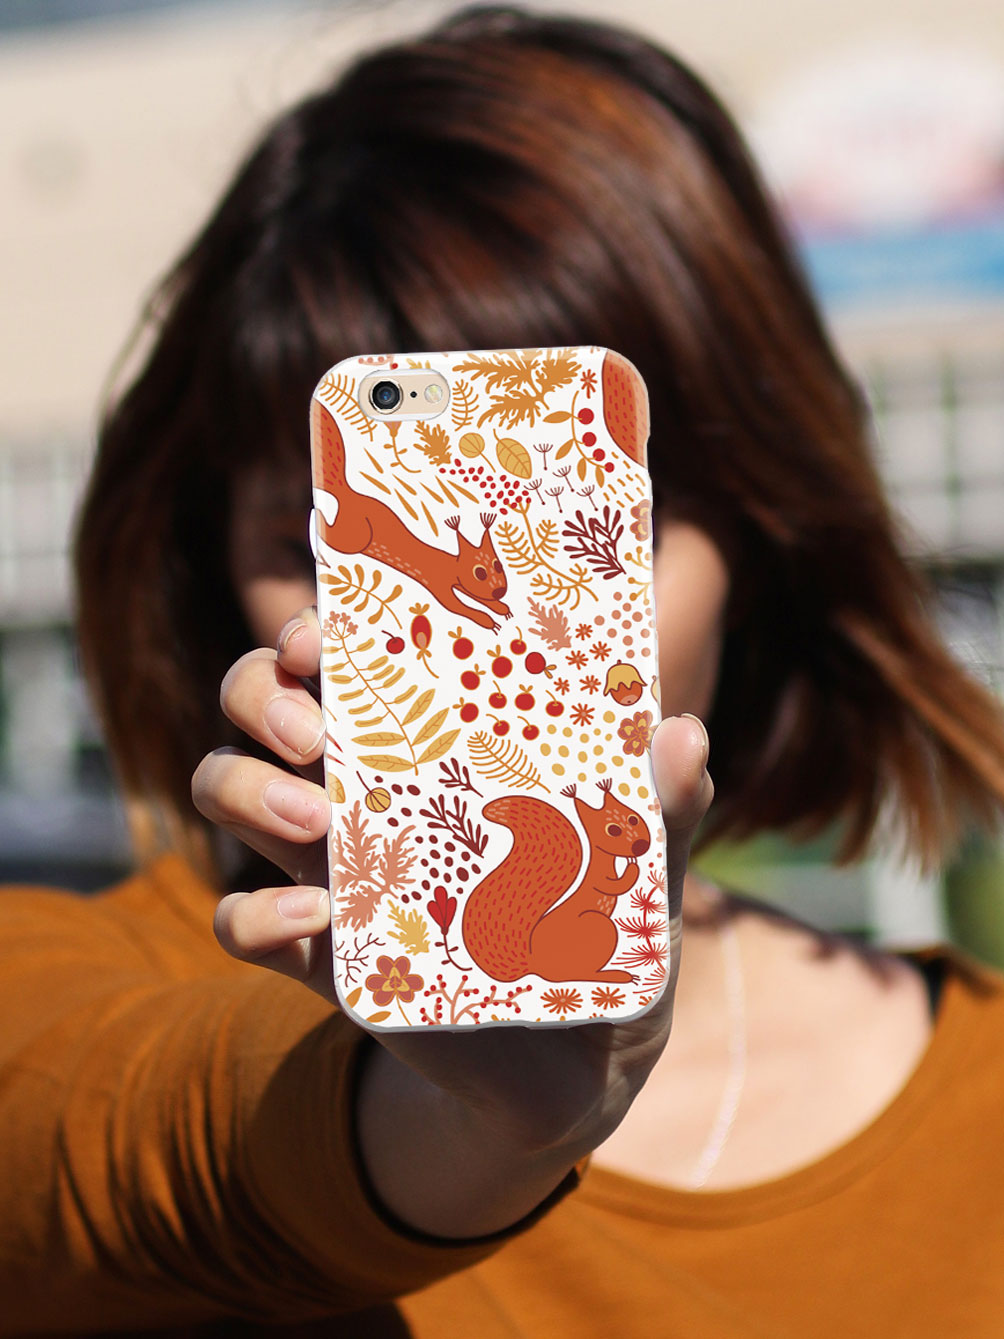 Squirrel Fall Pattern - White Case